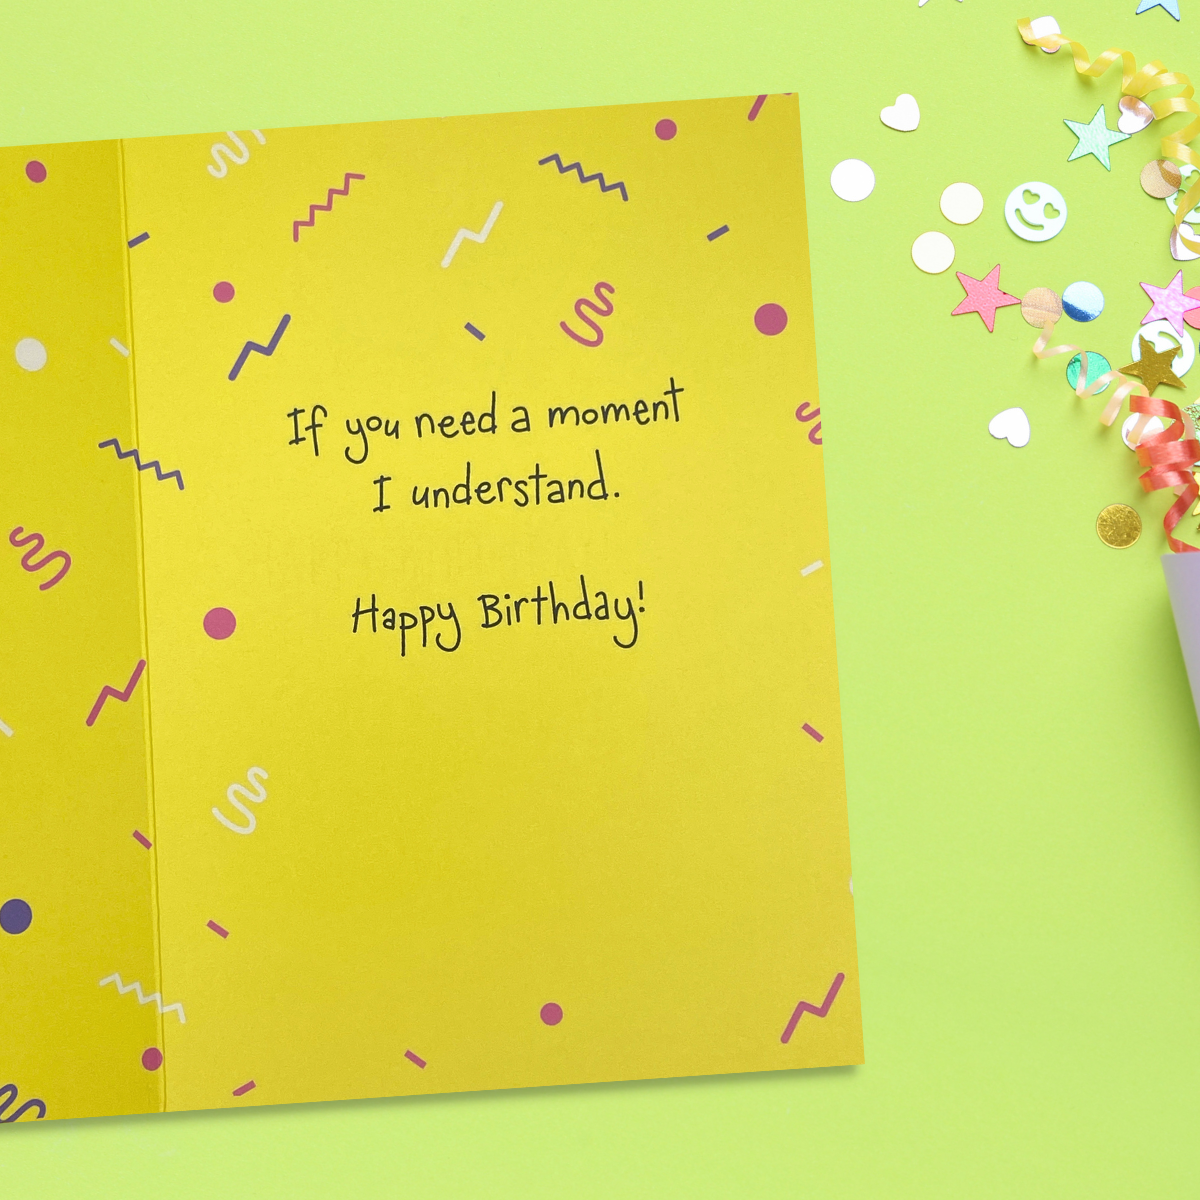 Inside a bright yellow card design with verse and confetti